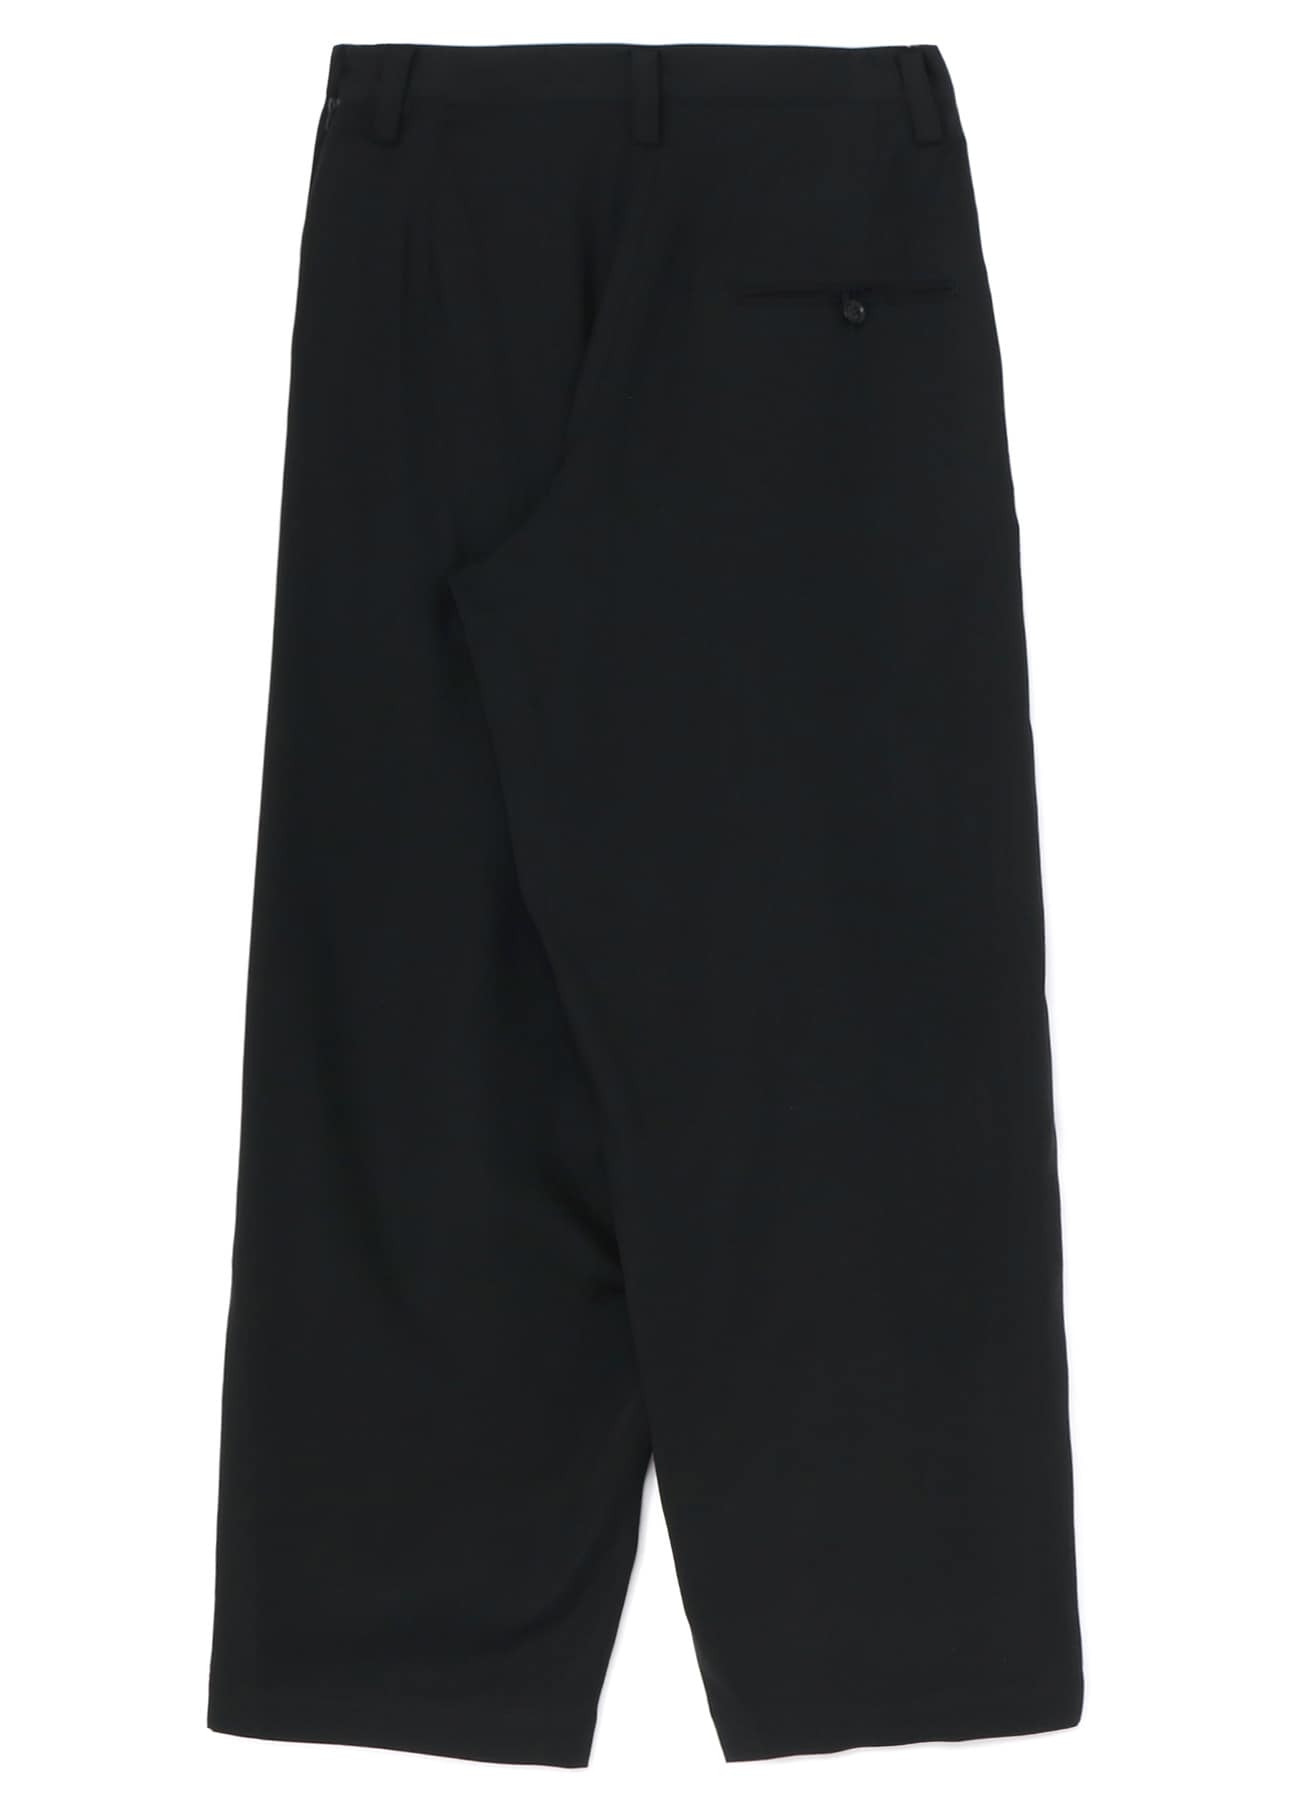 CUPRO DUNGAREE TWILL SIDE OPEN PANTS